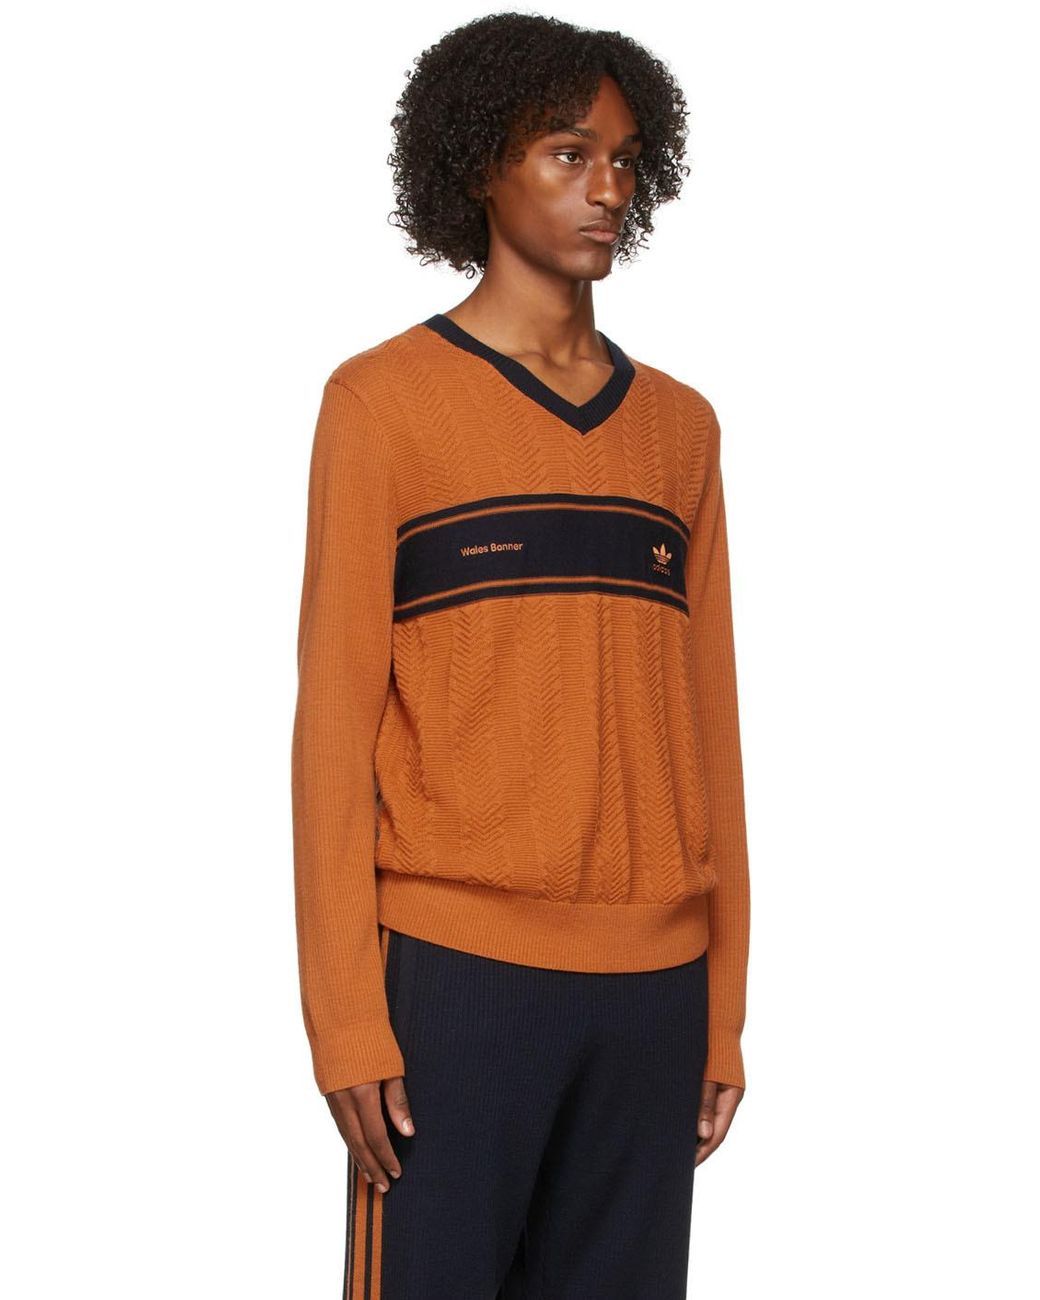 Wales Bonner Adidas Originals Edition Knit V-neck Sweater in